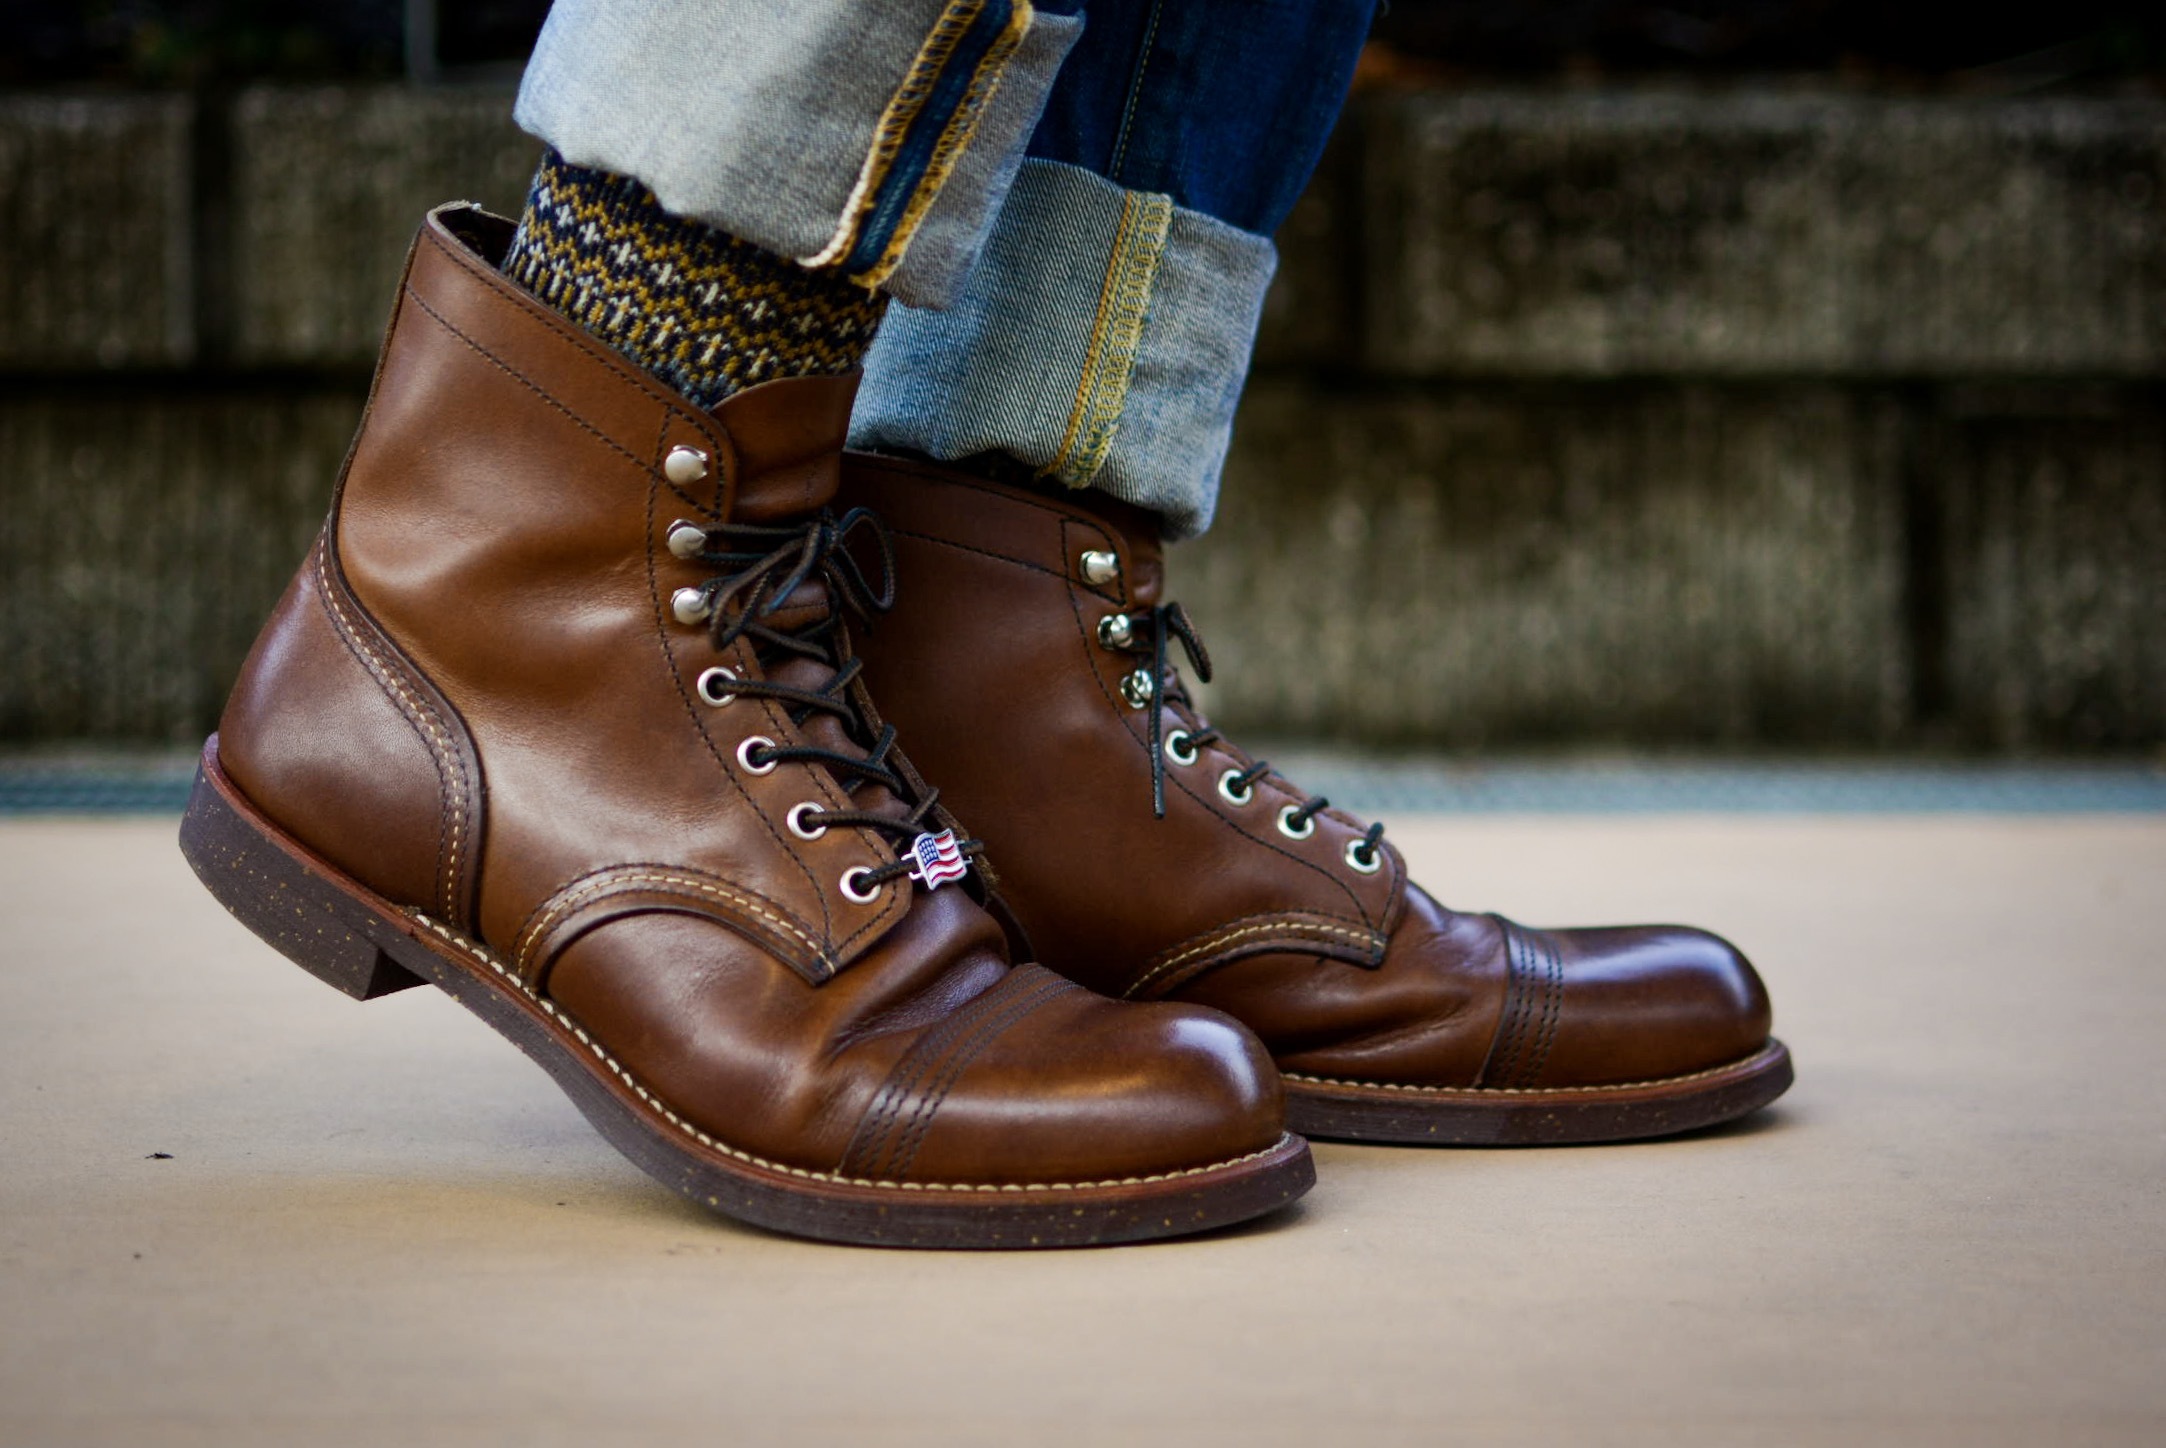 RED WING 8111 アイアンレンジ 25.5-